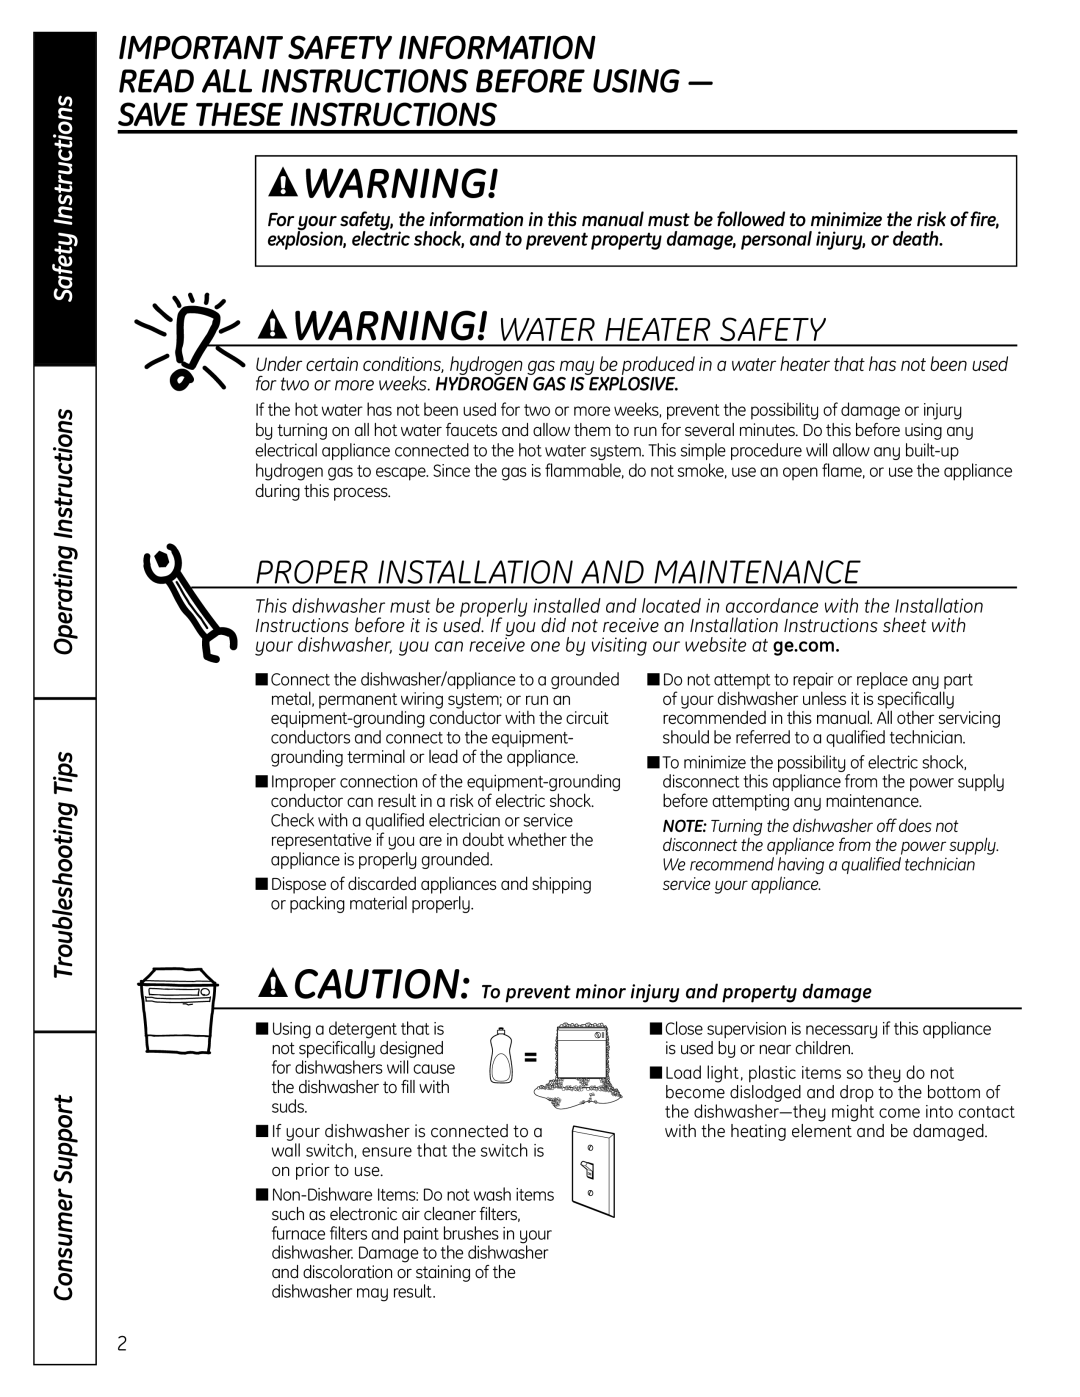 GE GSC3500 Important Safety Information Read All Instructions Before Using, Save These Instructions, Safety Instructions 